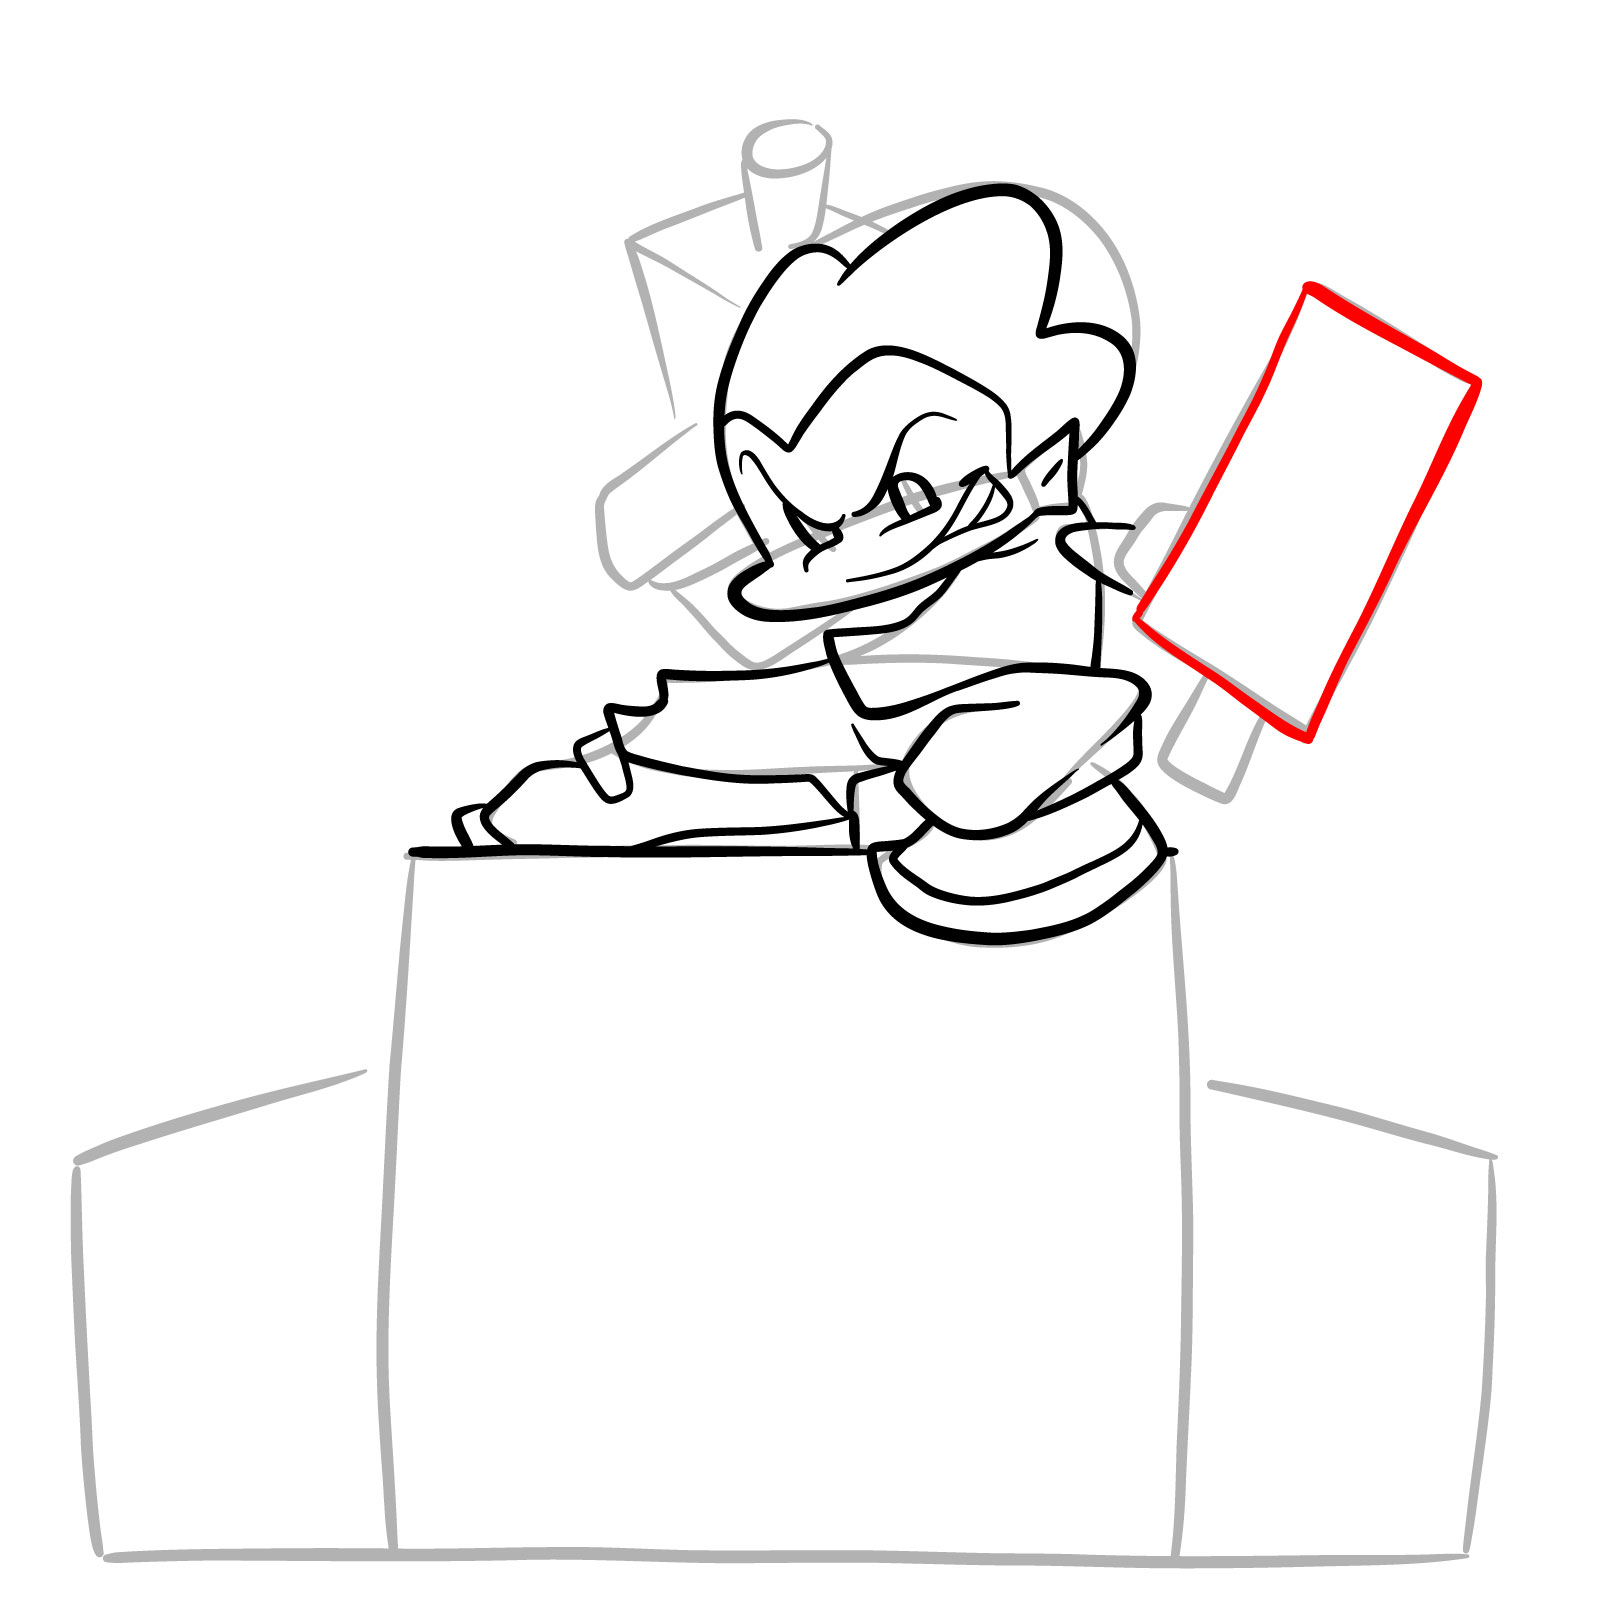 How to draw Pico on the speakers - step 16